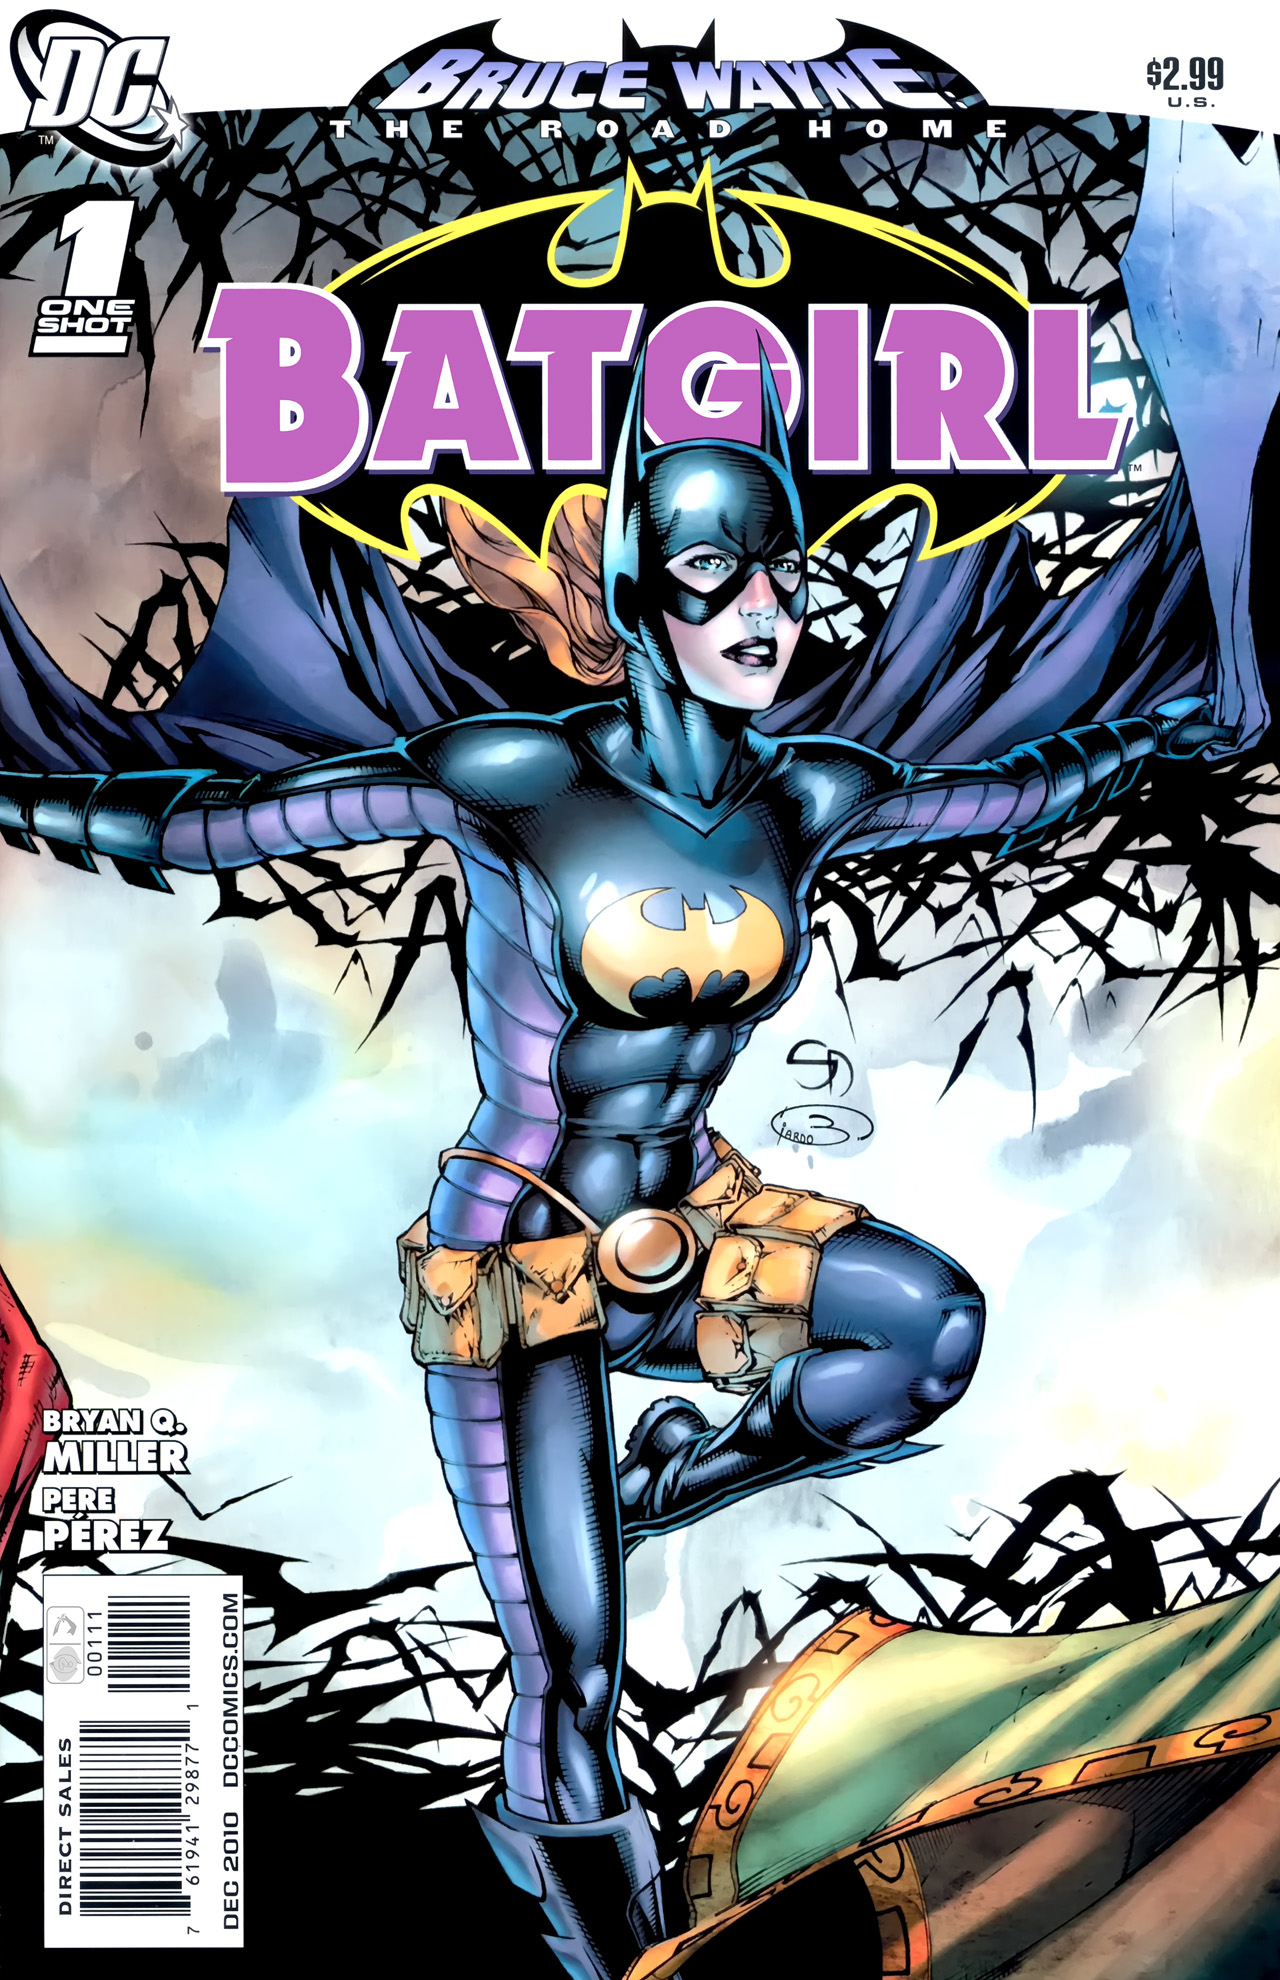 Read online Bruce Wayne: The Road Home comic -  Issue # Issue Batgirl - 1